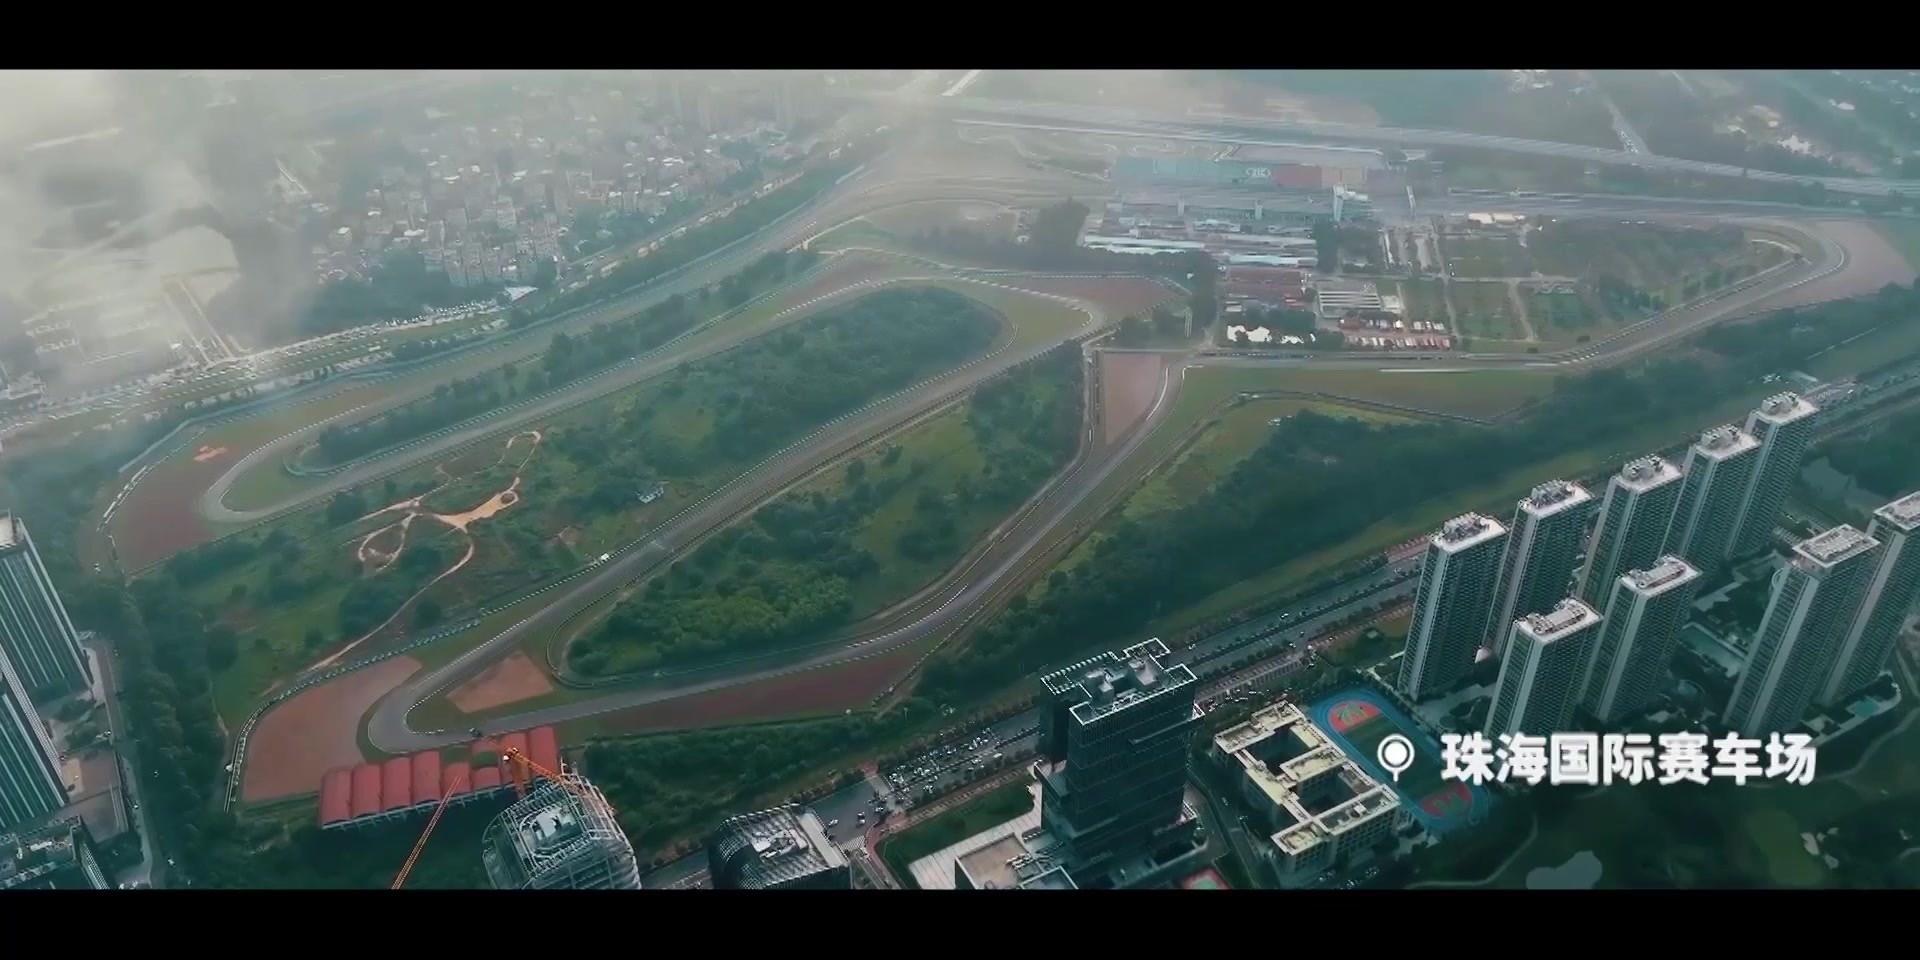 30th Anniversary of Chief | First Theme Promotion Video of FIA F4 Car Racing